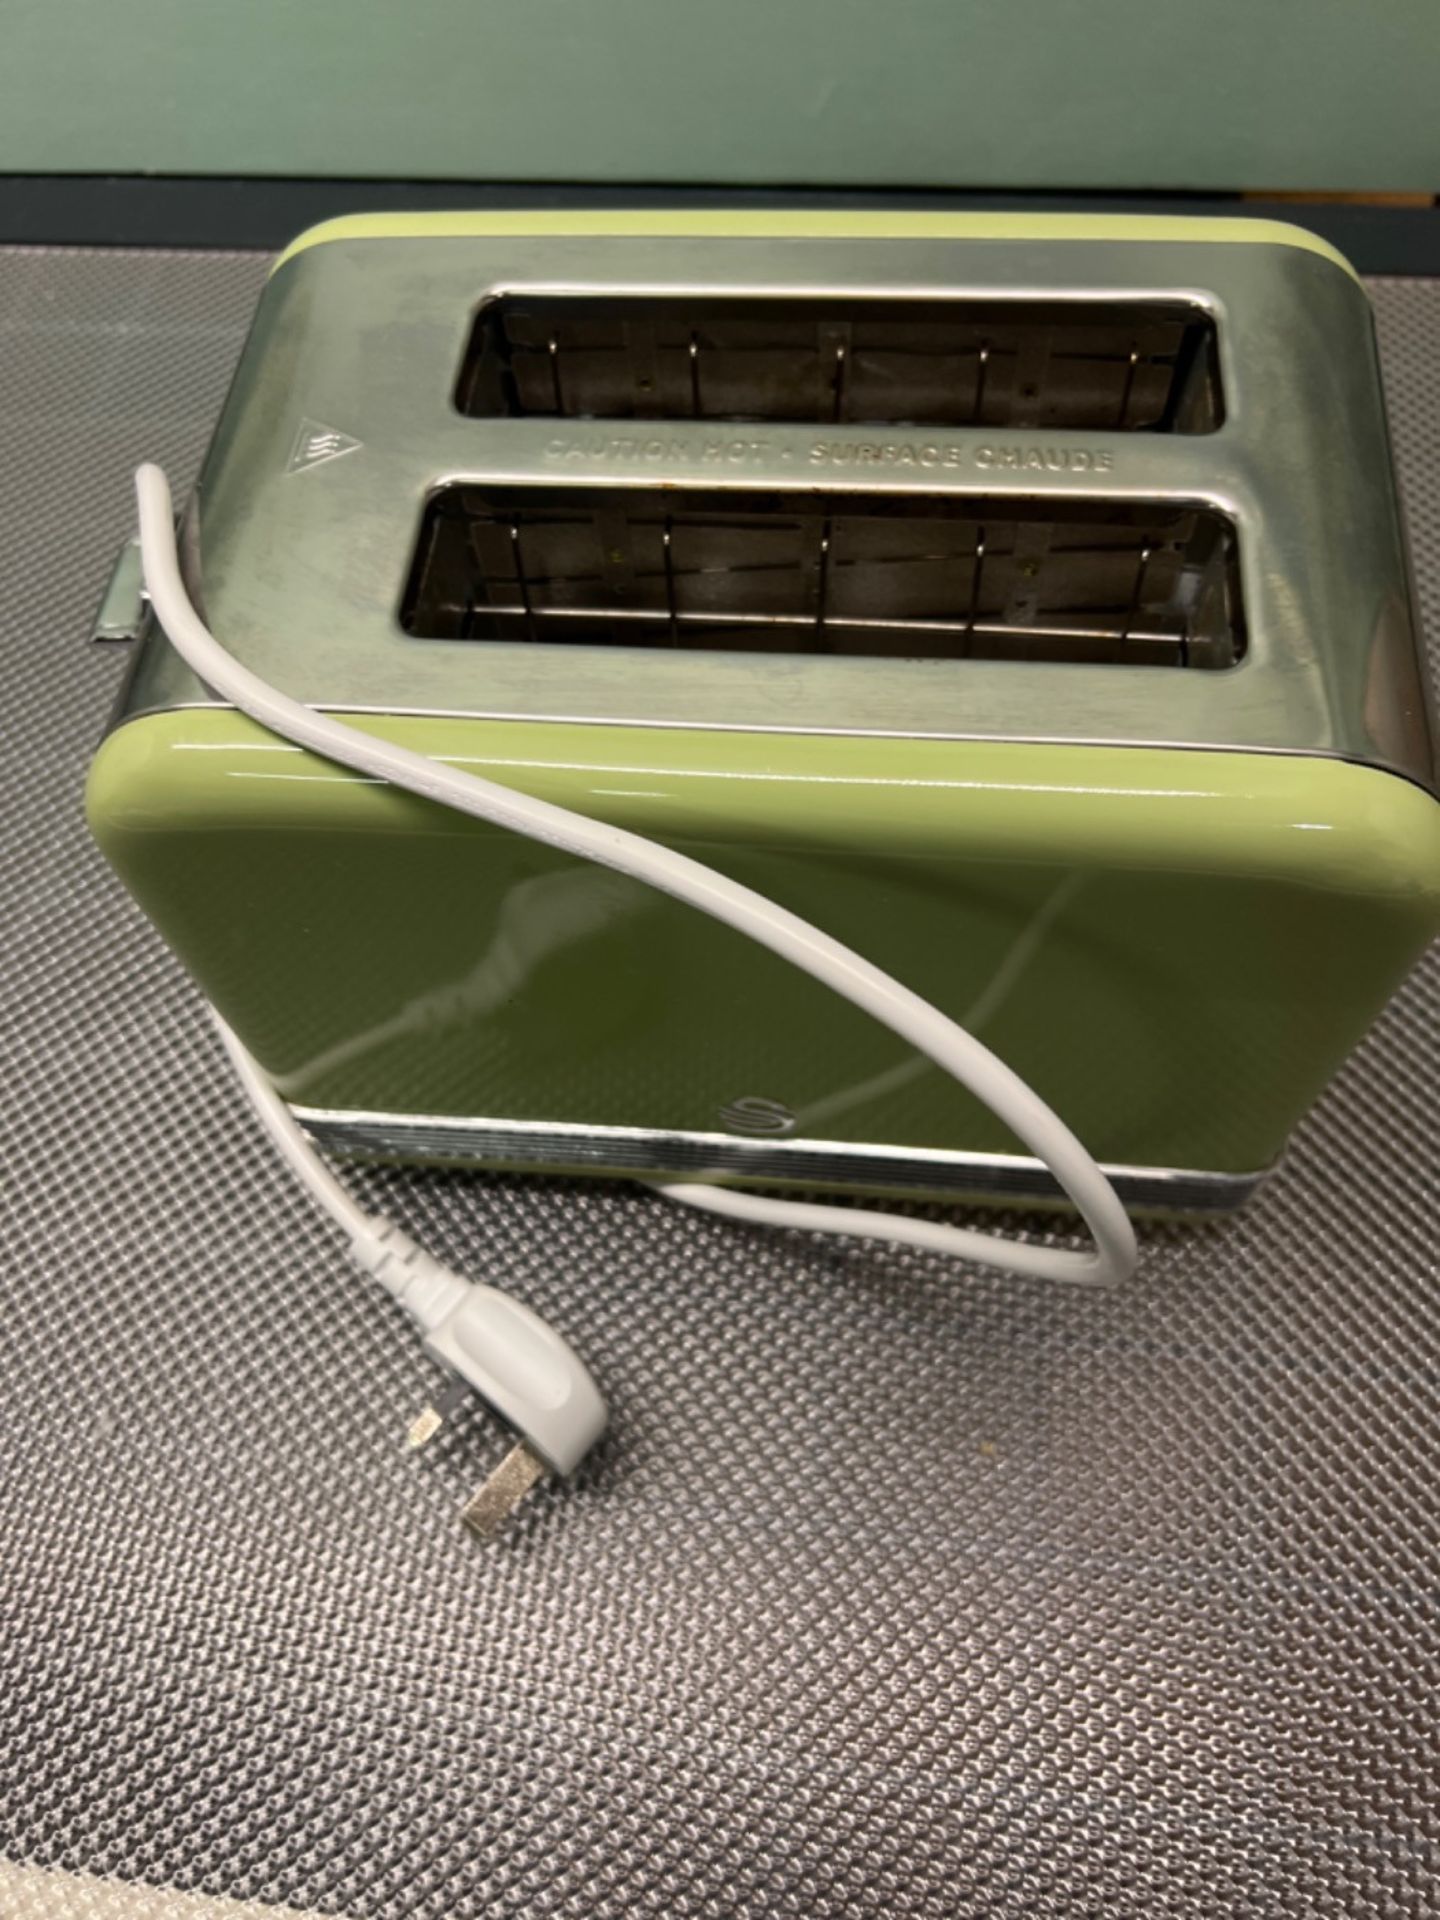 Swan ST19010GN Retro 2-Slice Toaster with Defost/Reheat/Cancel Functions, Cord Storage, 815W, Ret... - Image 2 of 2